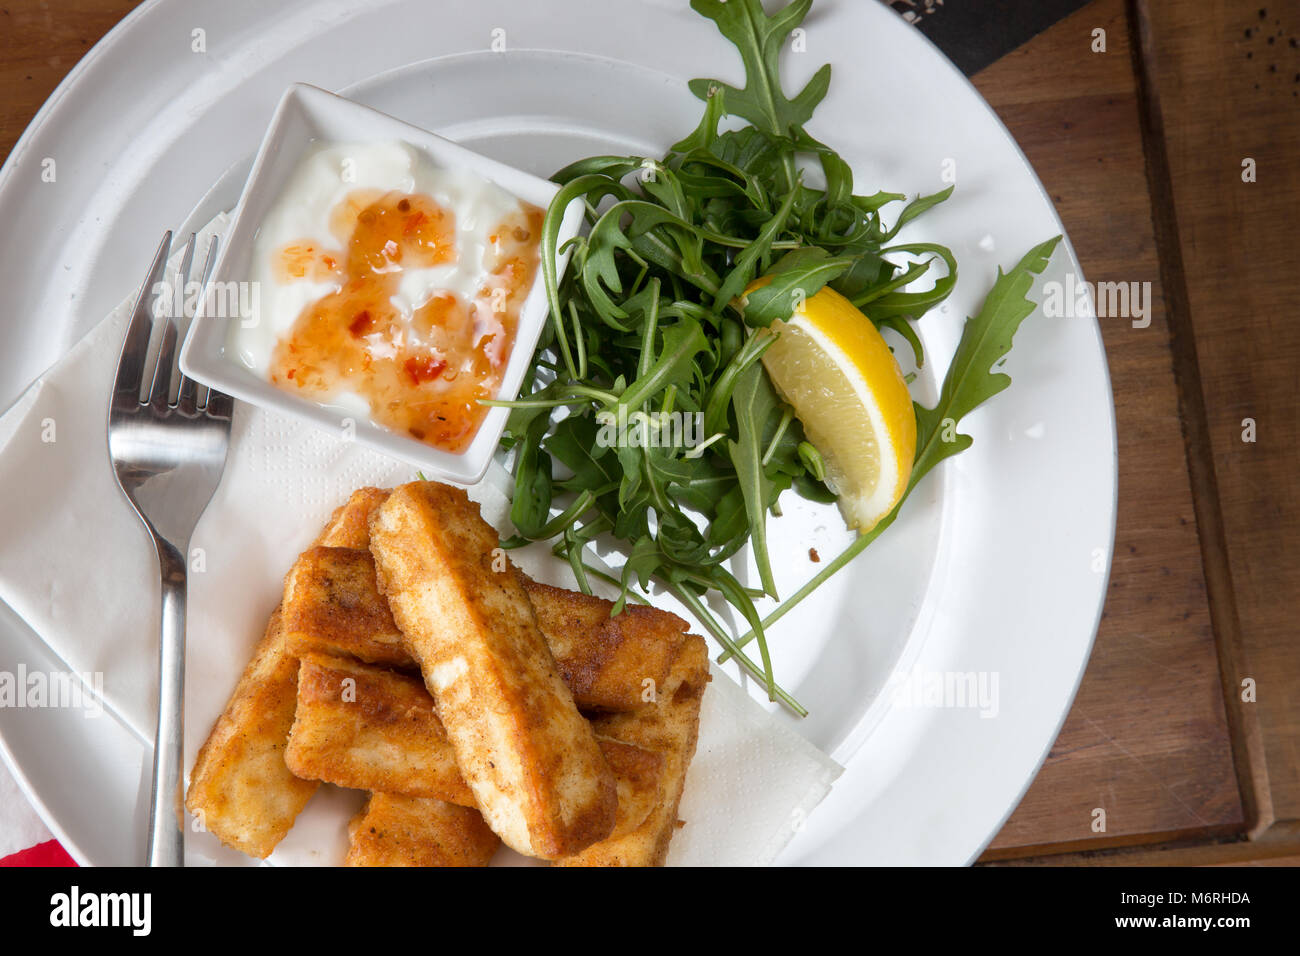 A starter course of Halloumi cheese fries with a Rocket salad and yogurt with sweet chili sauce dip taken in an English pub restaurant Stock Photo